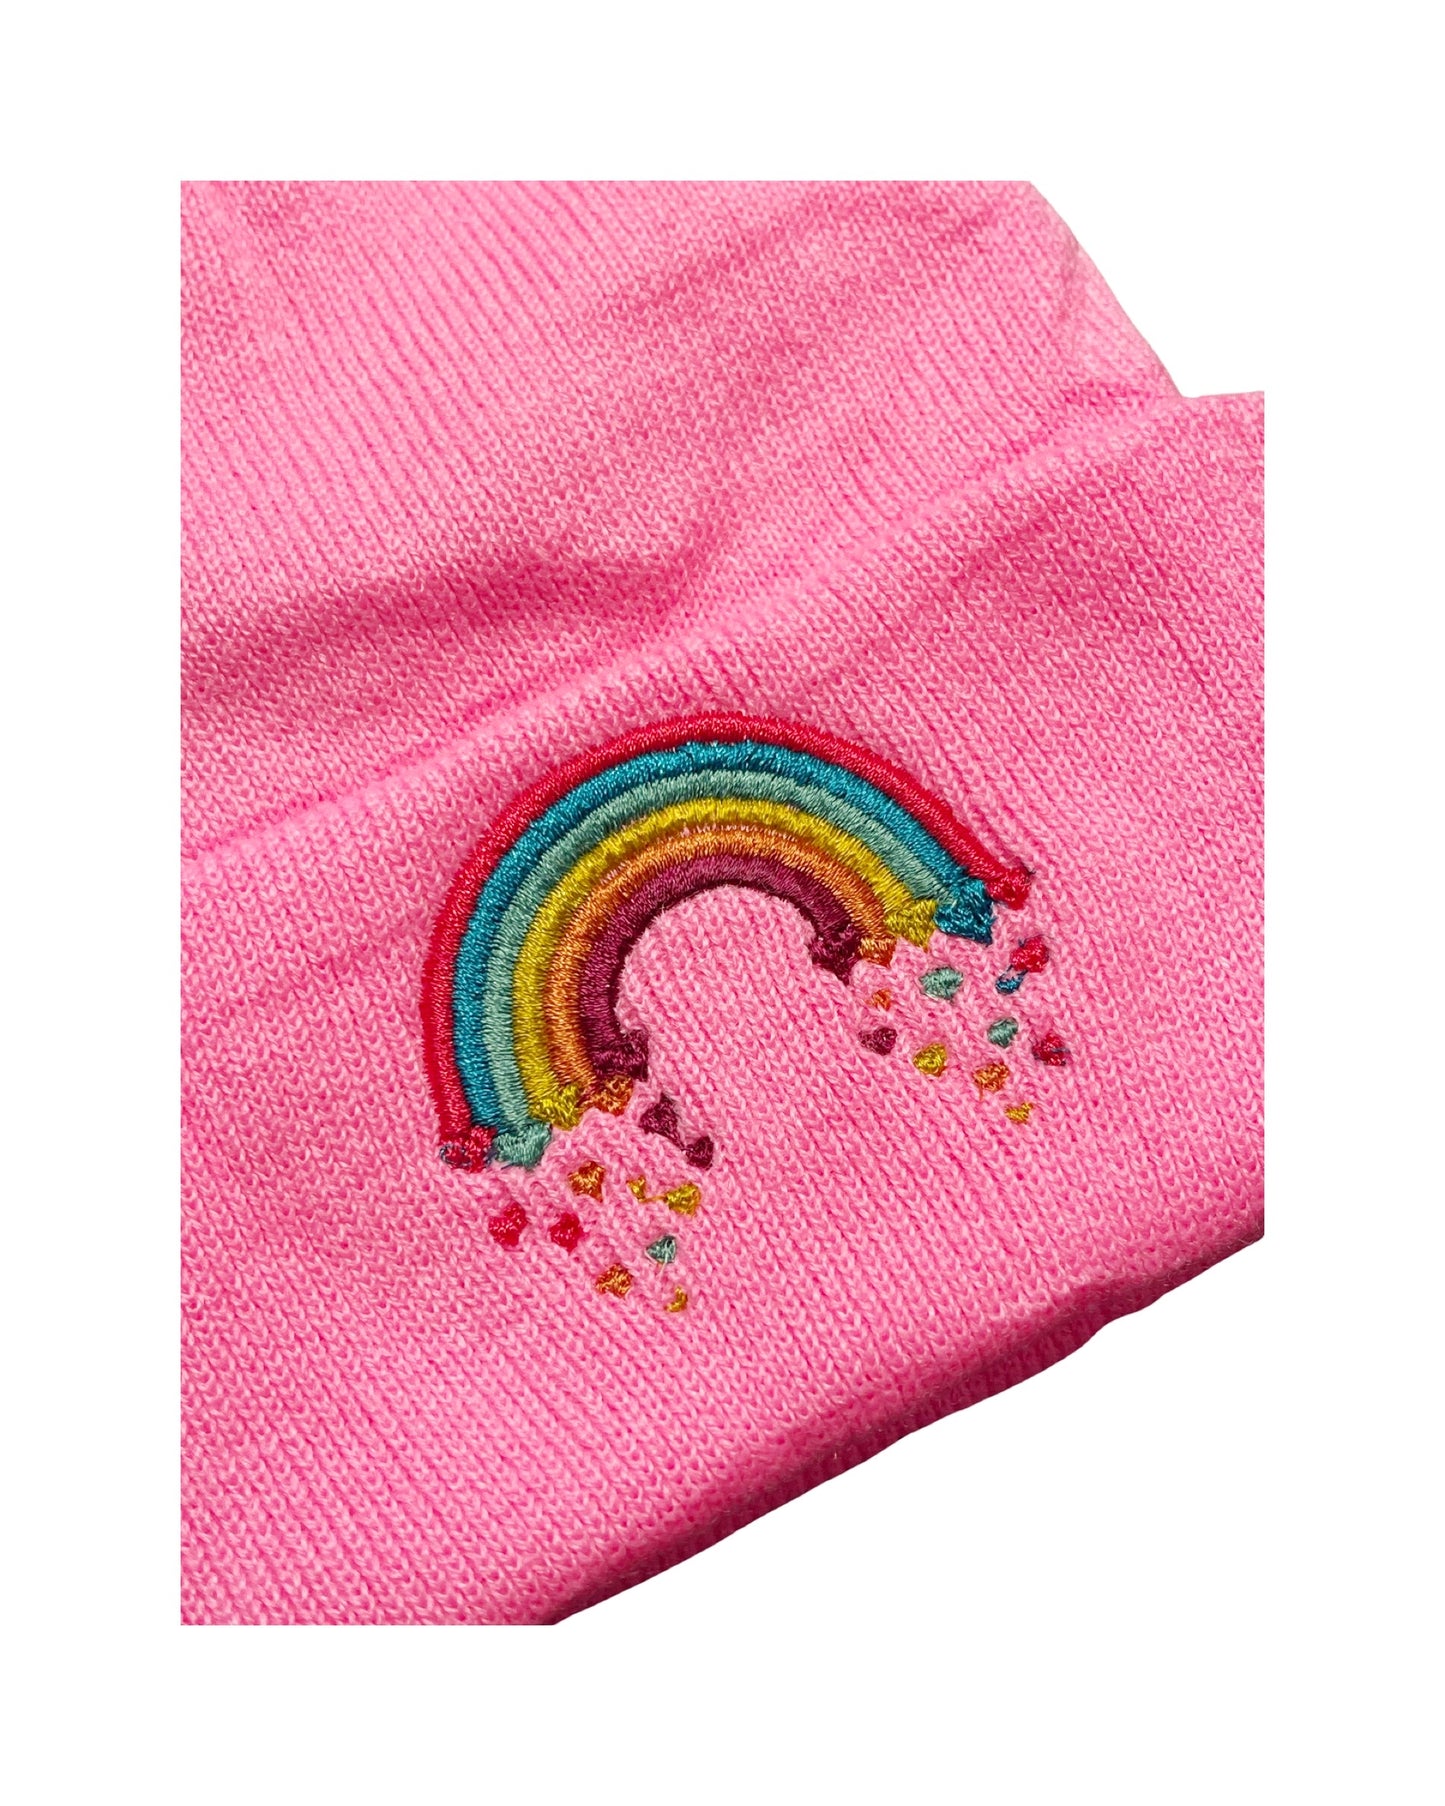 closeup of embroidery on neon pink beanie, embroidery is a brightly colored rainbow that is raining hearts